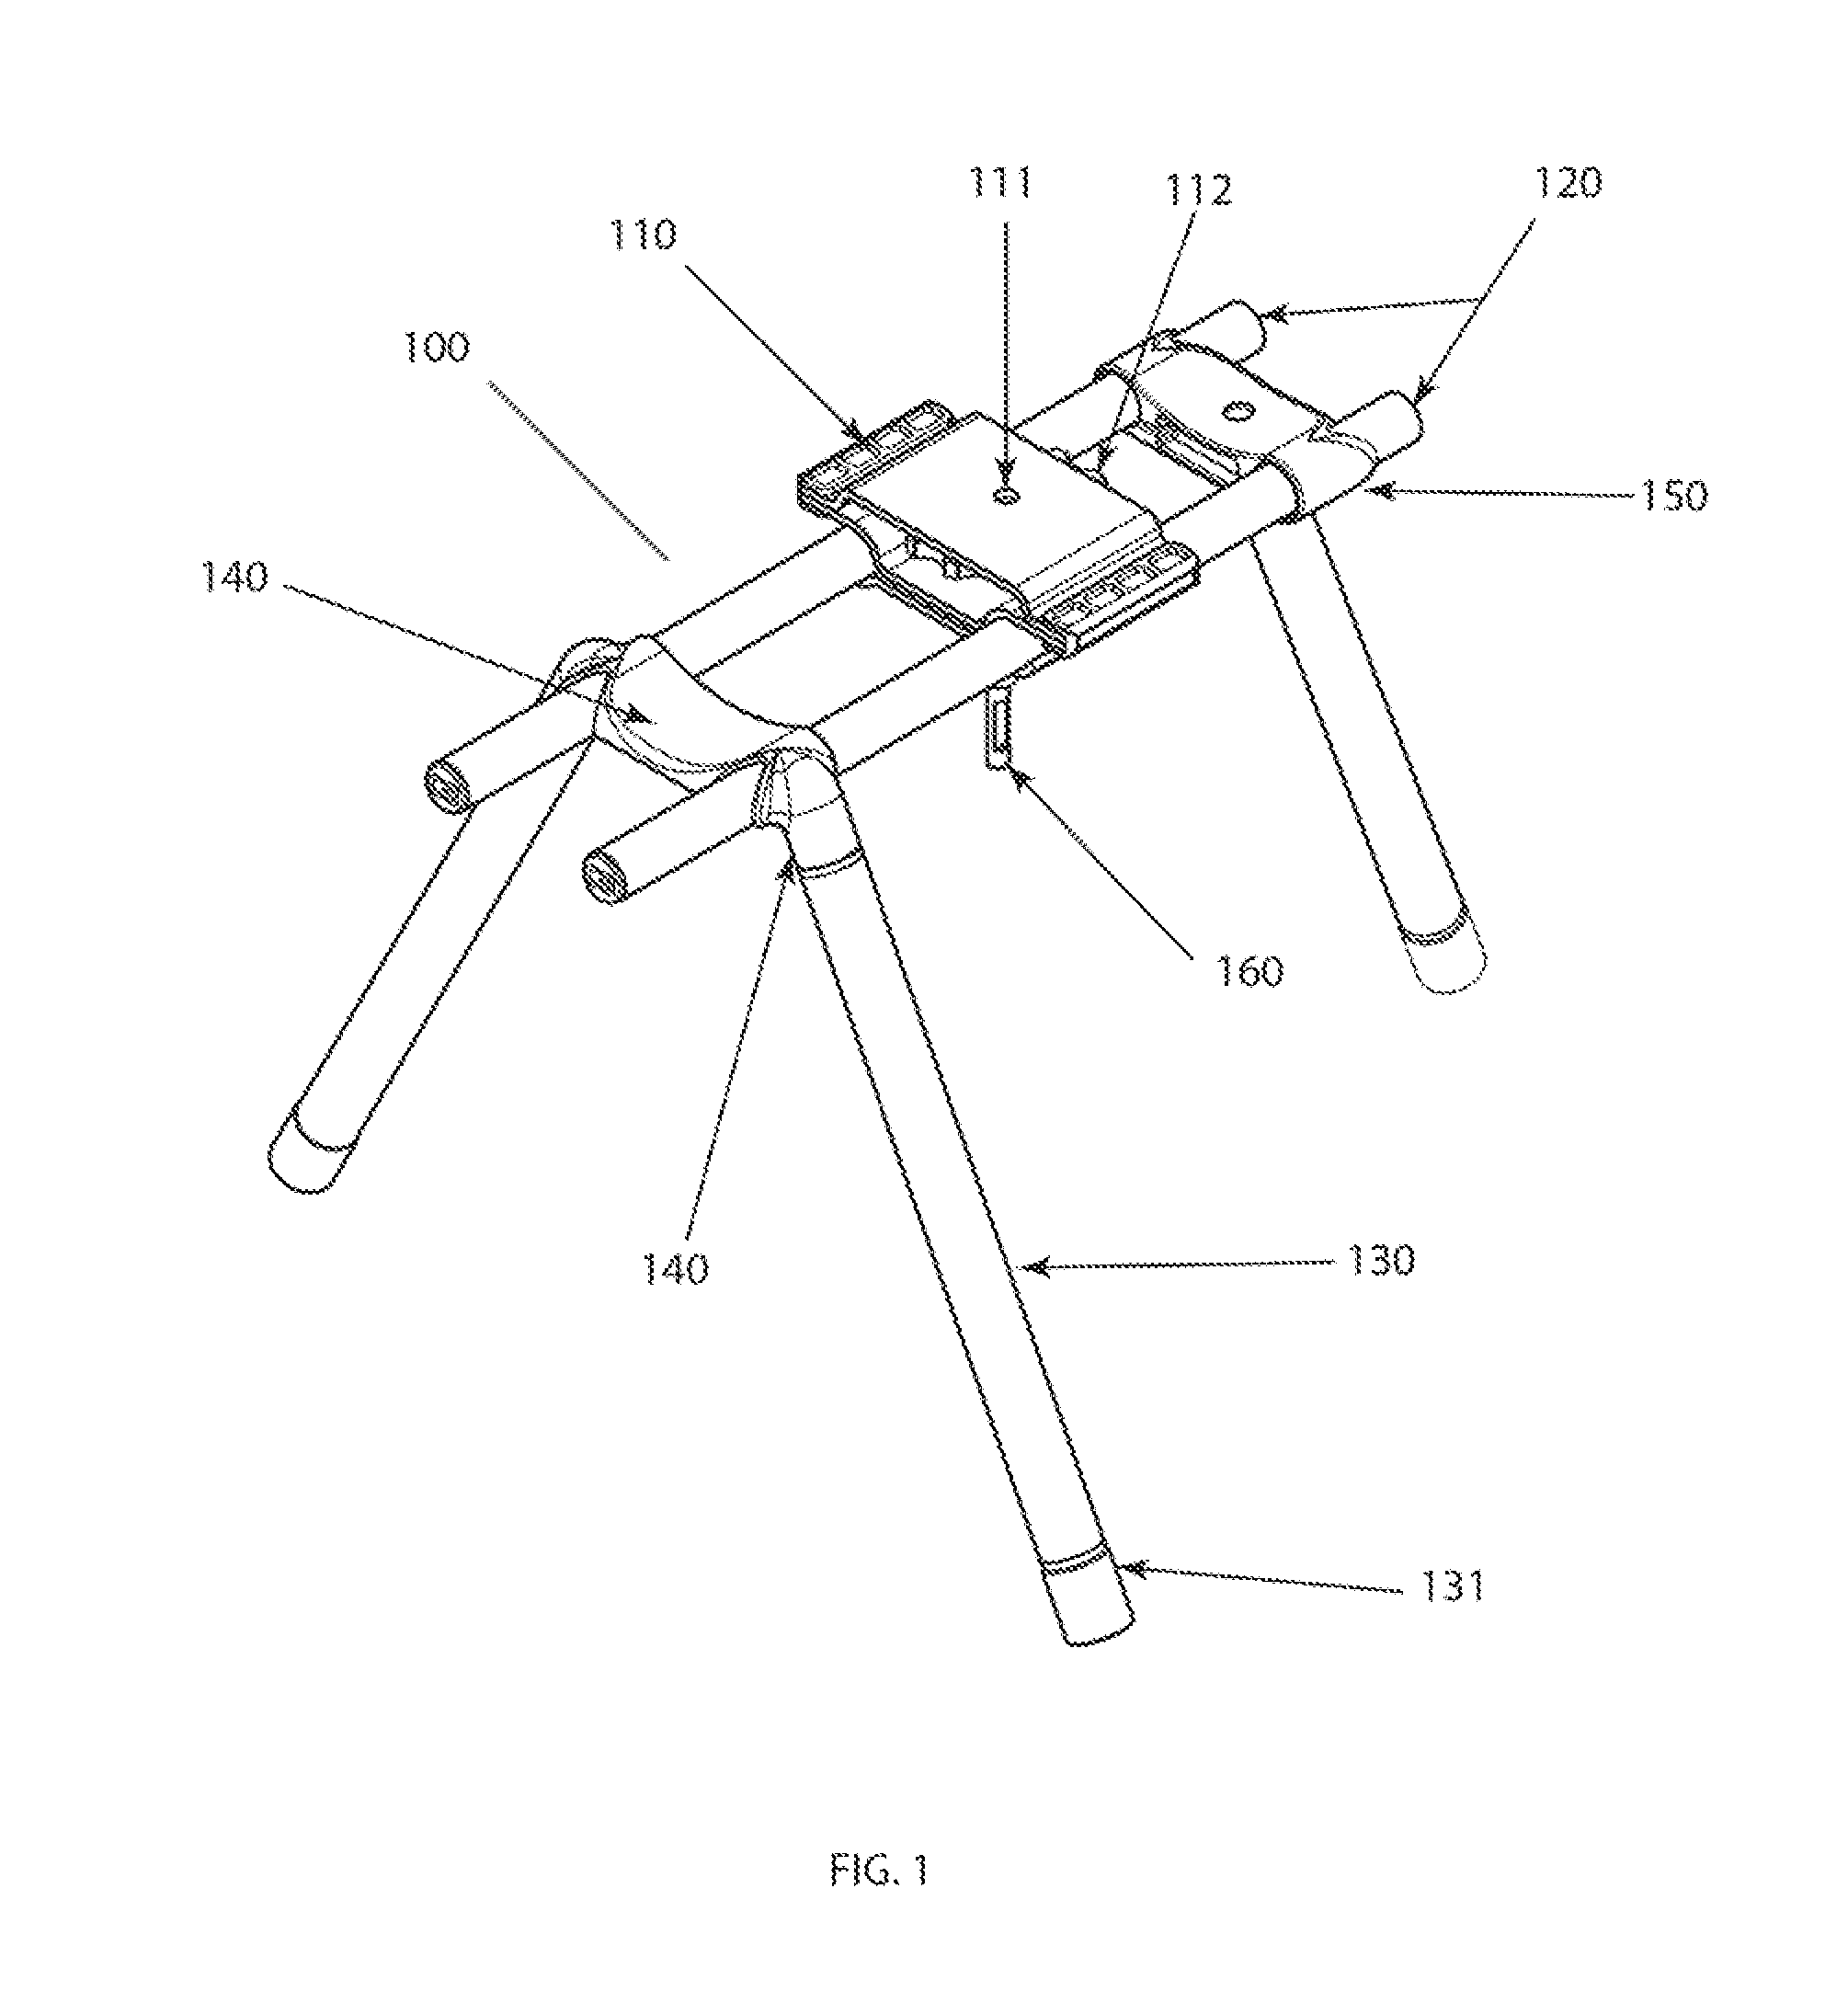 Camera stabilization device and method of use